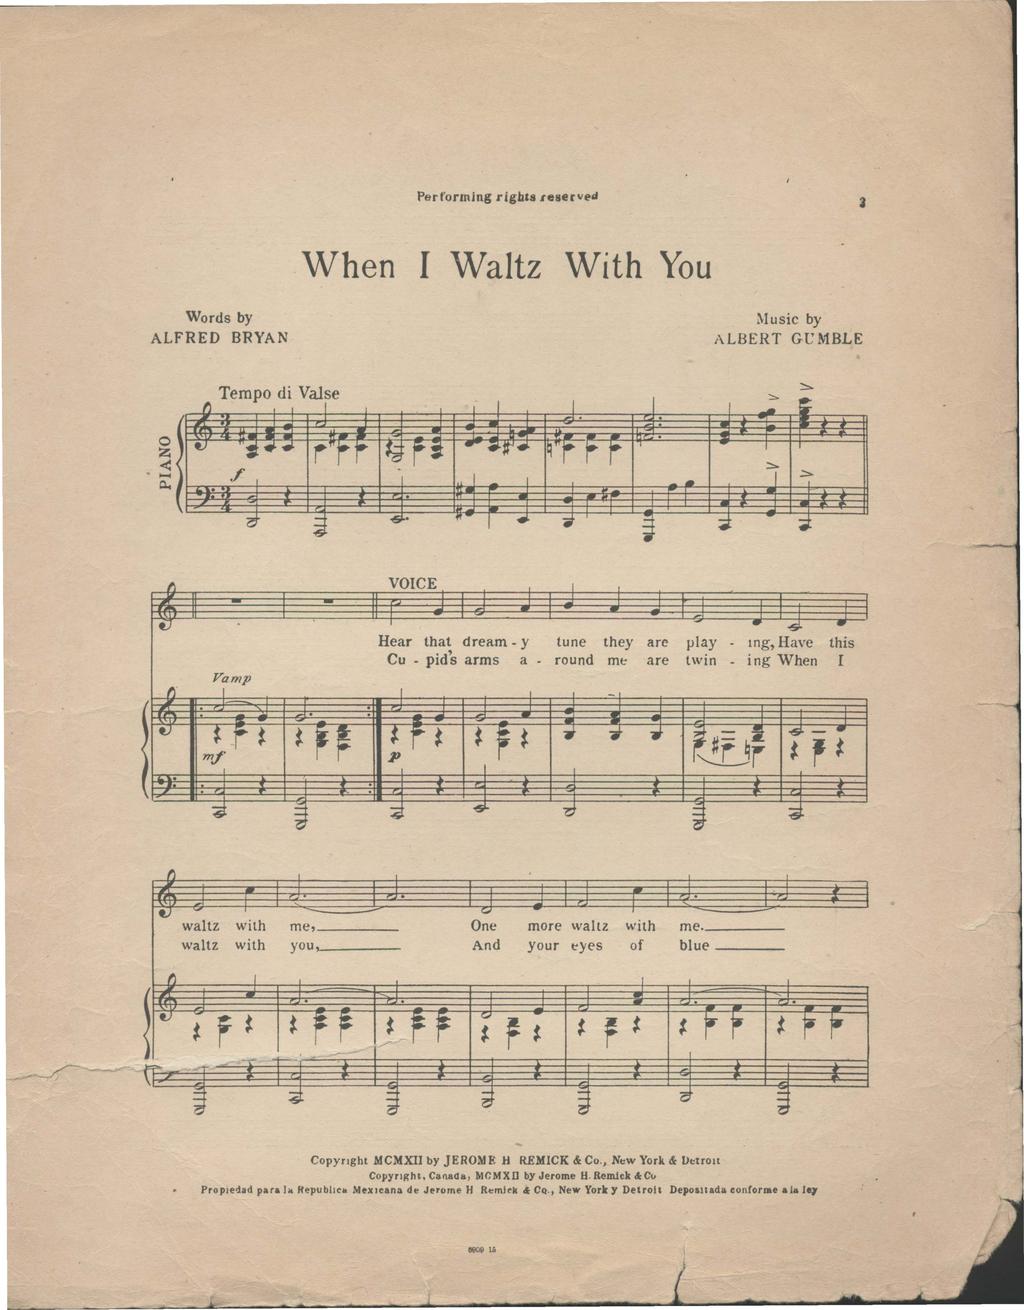 Pefoming igh&s eseved When Waltz With You Wods by ALFRED BRYAN Music by ALBERT GLMBLE 0 z < c Tempo di Valse, & T,_ Tf : f c lll:e " \ 2: 6,_ f i, 6" ff,_ q", i " " = ::::, :::: Vamp Hea that deam y